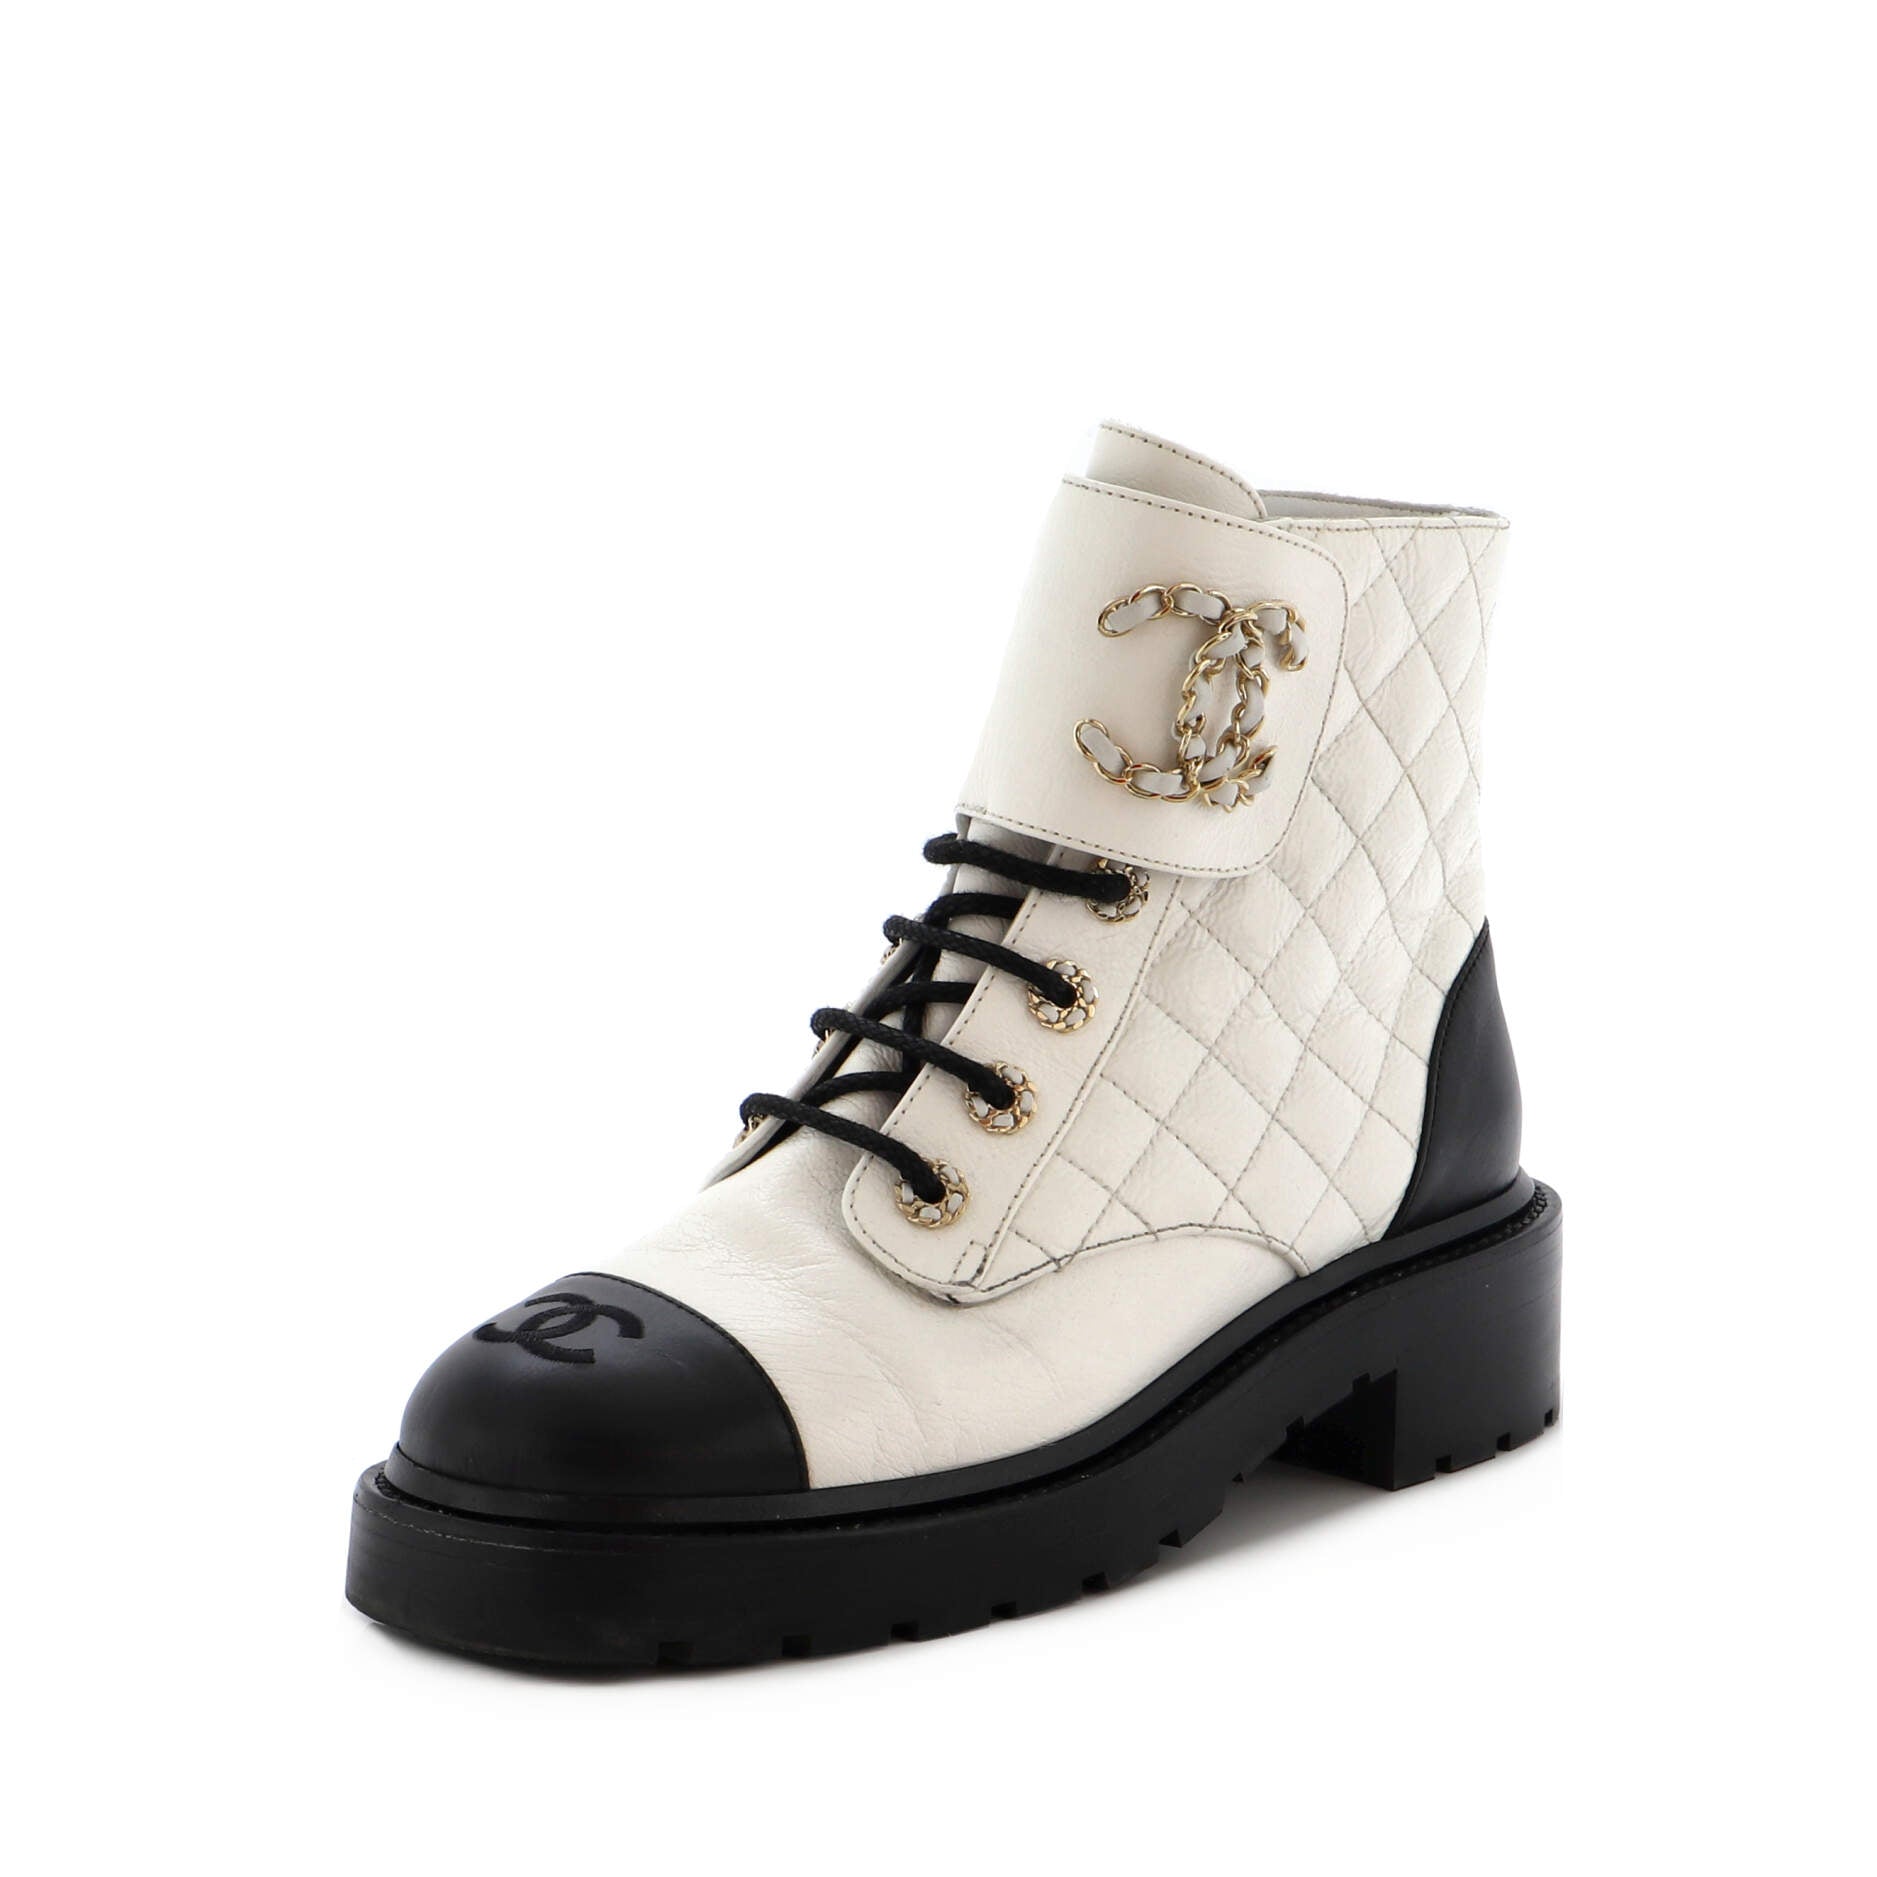 Shearling lace up boots Chanel Black size 40.5 EU in Shearling